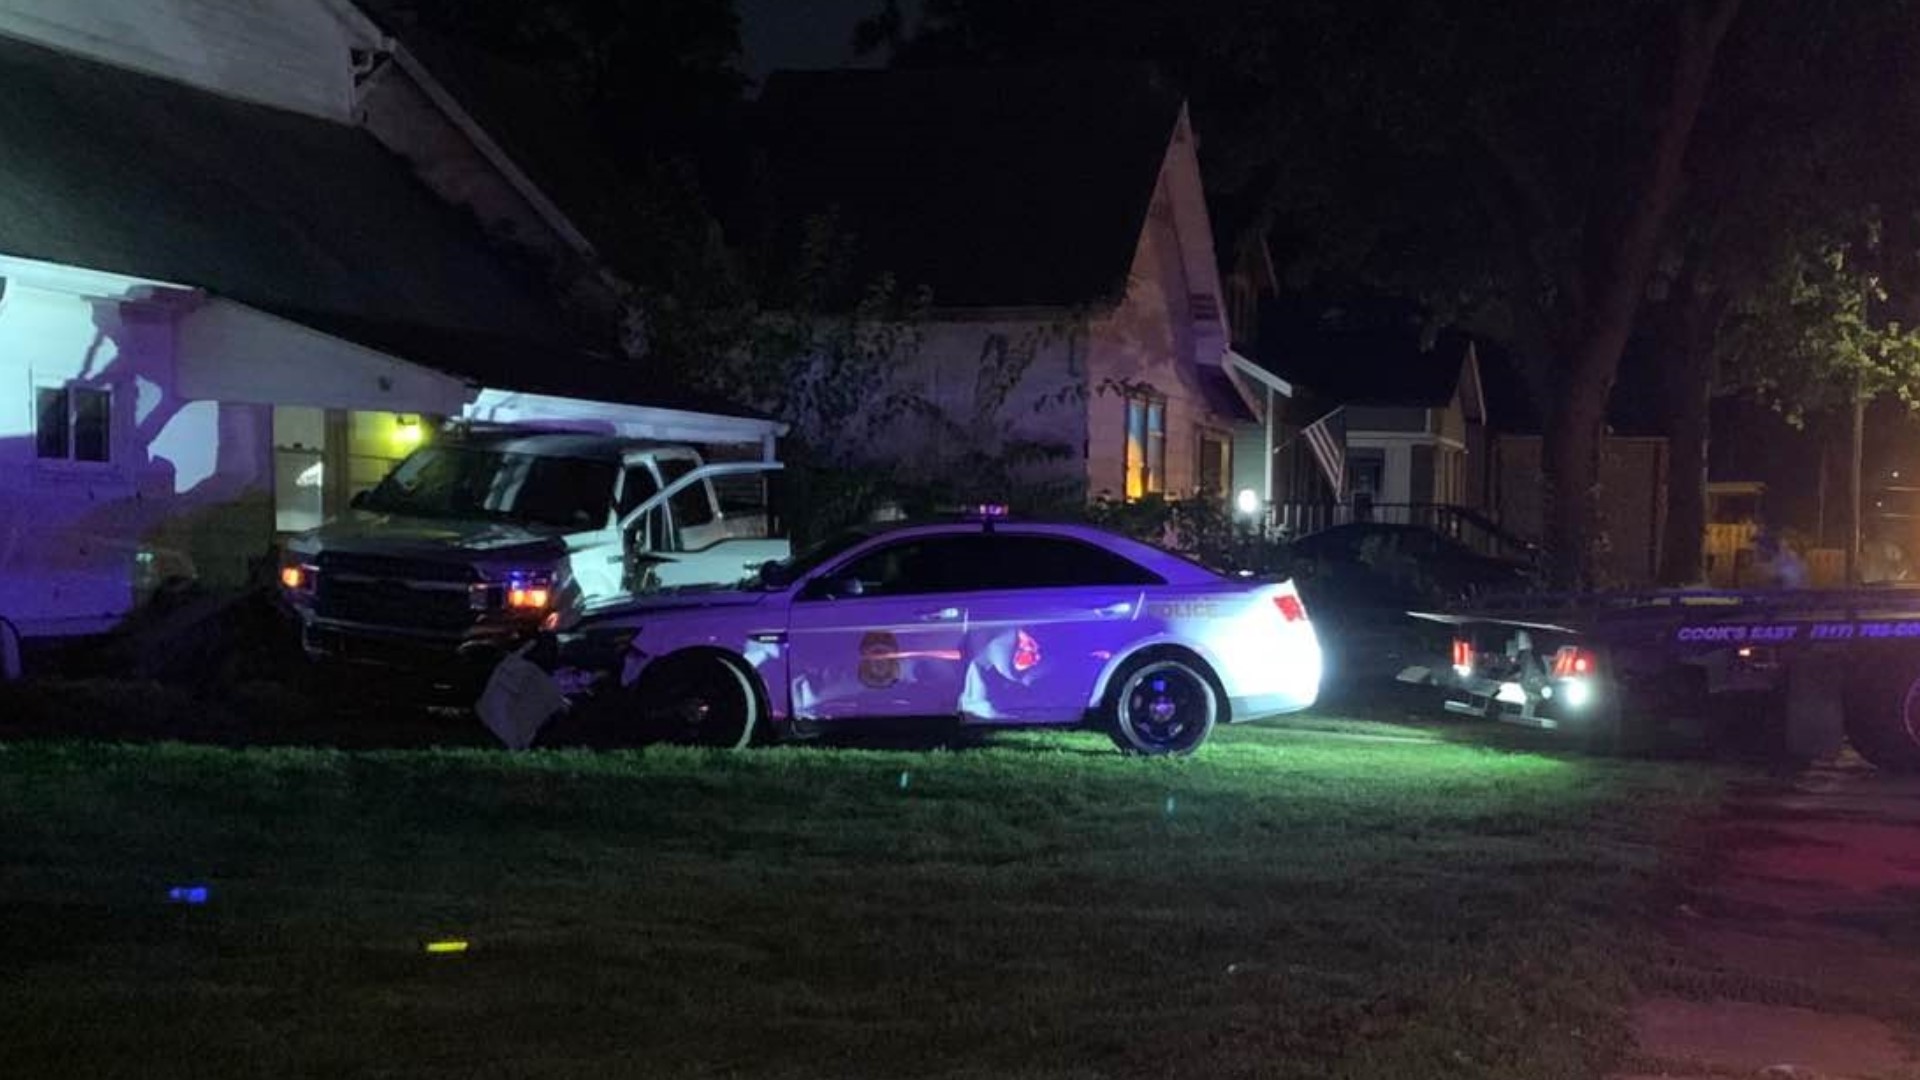 The pursuit began around 12:30 a.m. and ended when the suspect's truck struck a house in the 2100 block of South Pennsylvania Street.